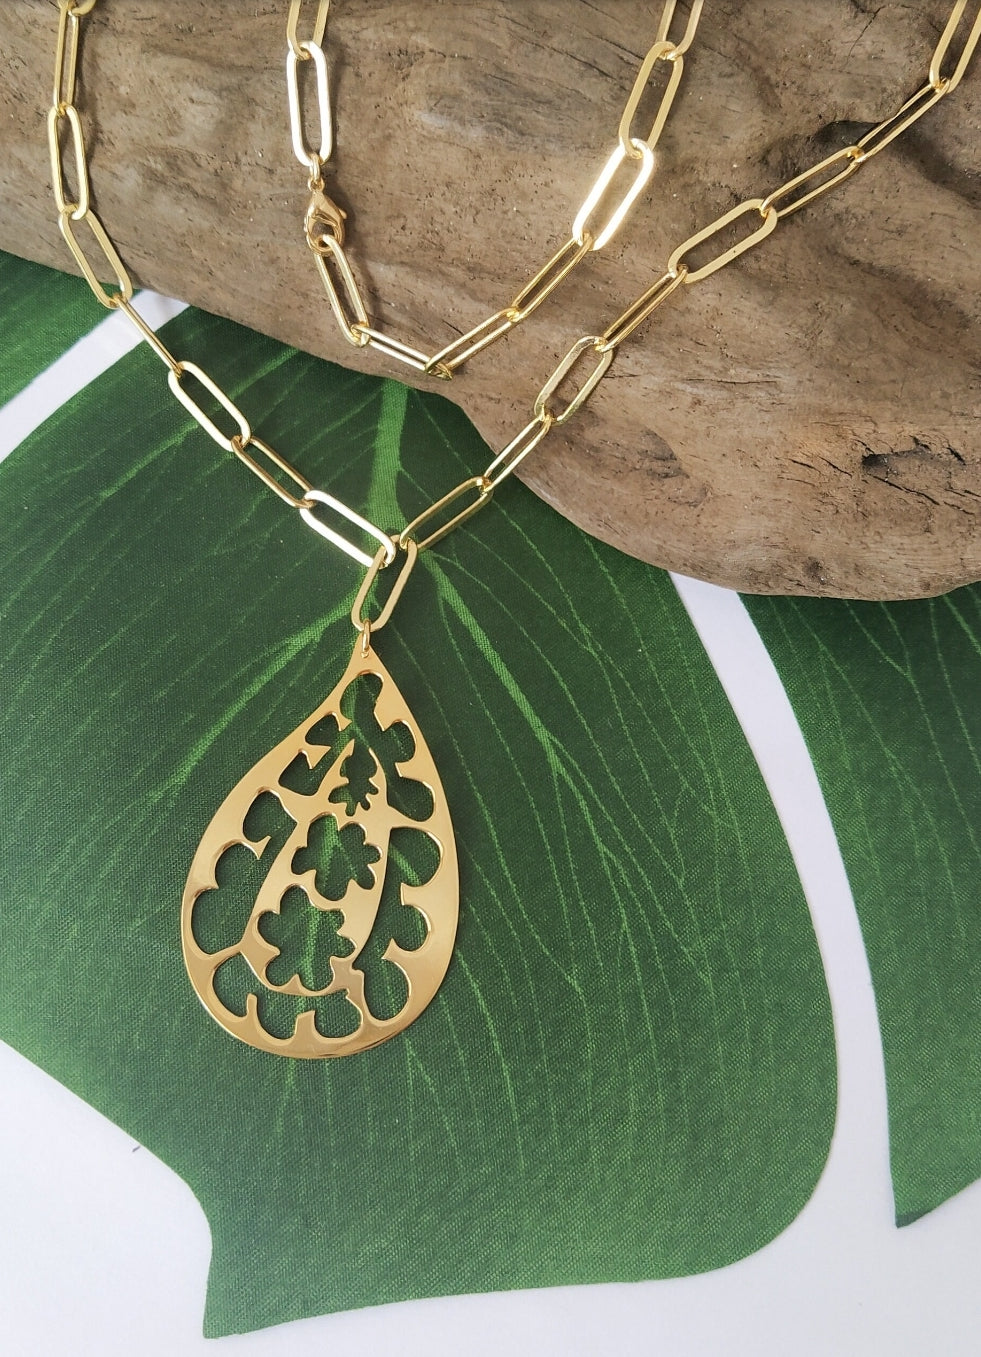 Gold Paisley Necklace. Flourish Collection. Handmade by Ariadna Echenique. Gold plated.